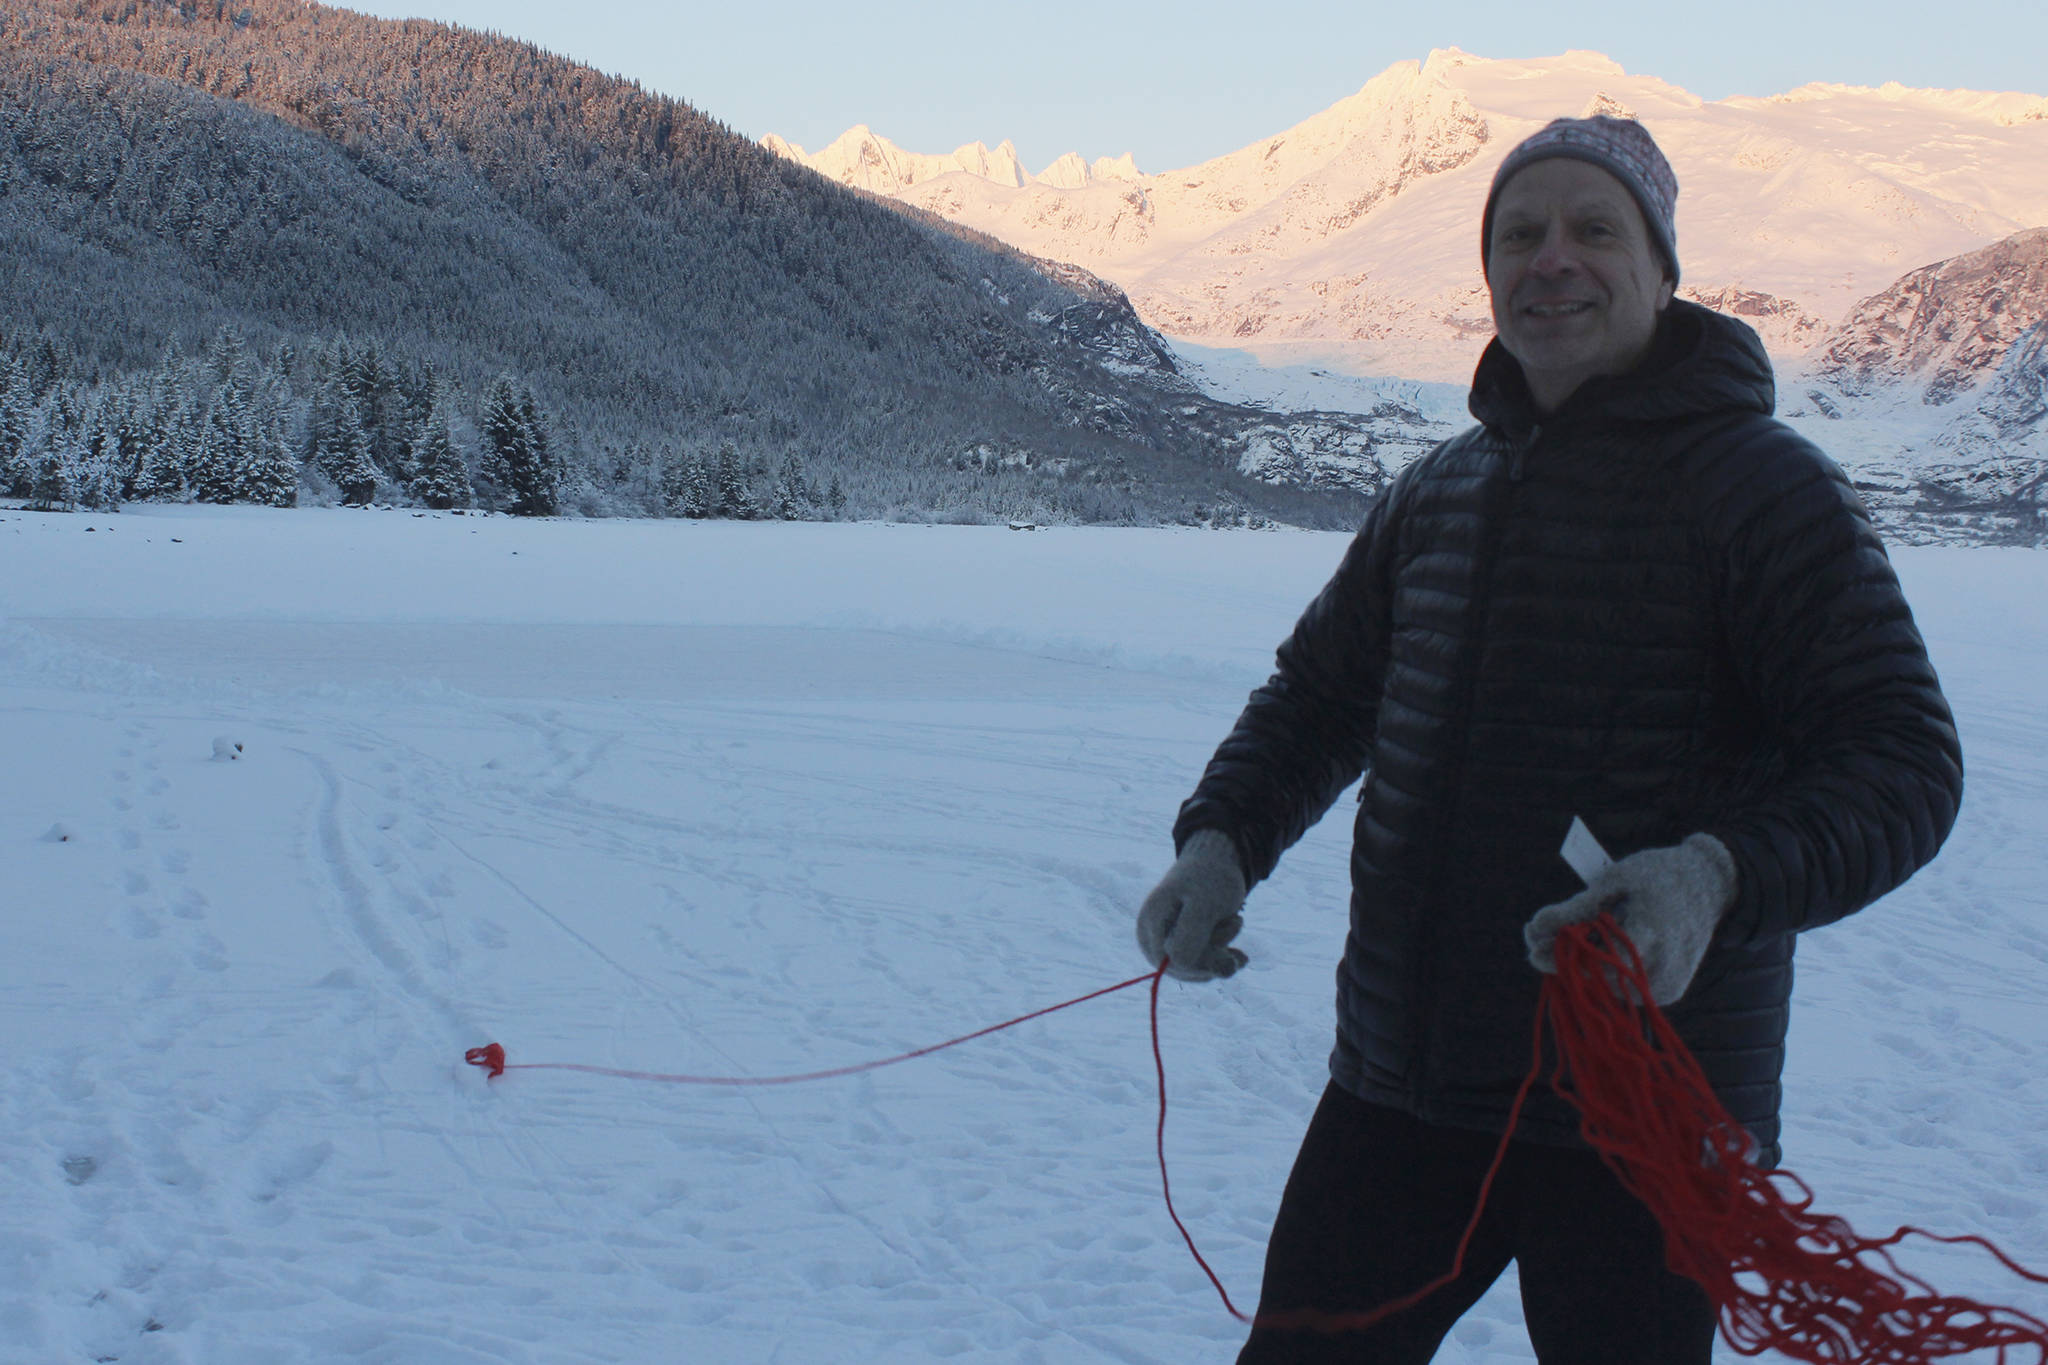 Scott McCutcheon demonstrates with a rescue rope on Tuesday after helping save Bob Funk, a biker who had fallen through the ice at Mendenhall Lake, a few days earlier. (Alex McCarthy | Juneau Empire)